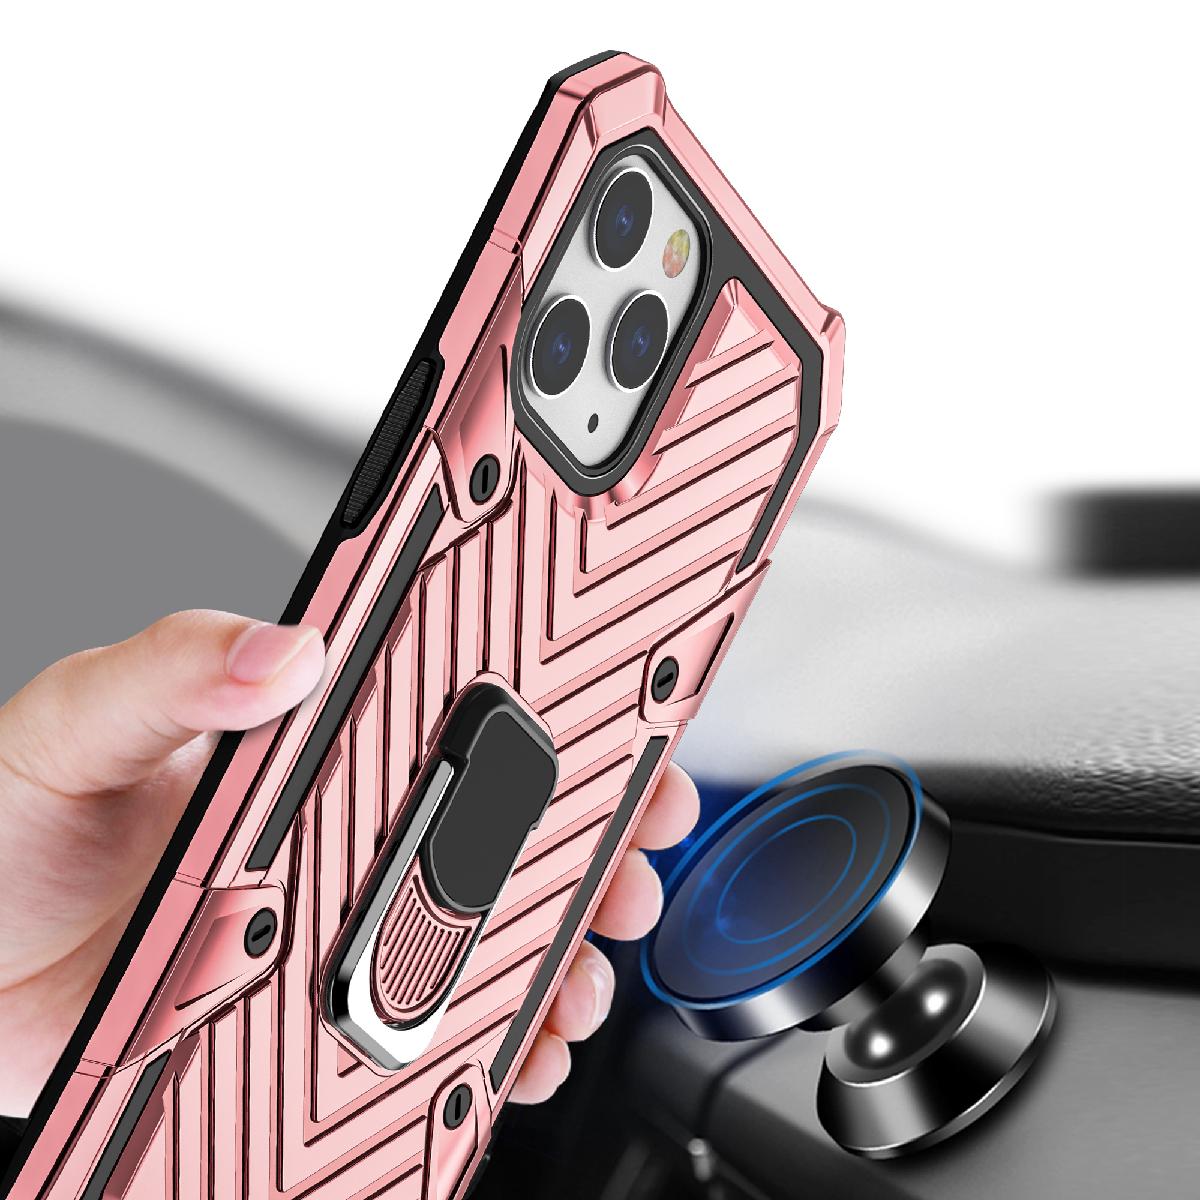 IPHONE 12/ IPHONE 12 PRO Kickstand Anti-Shock And Anti Falling Case In Rose Gold